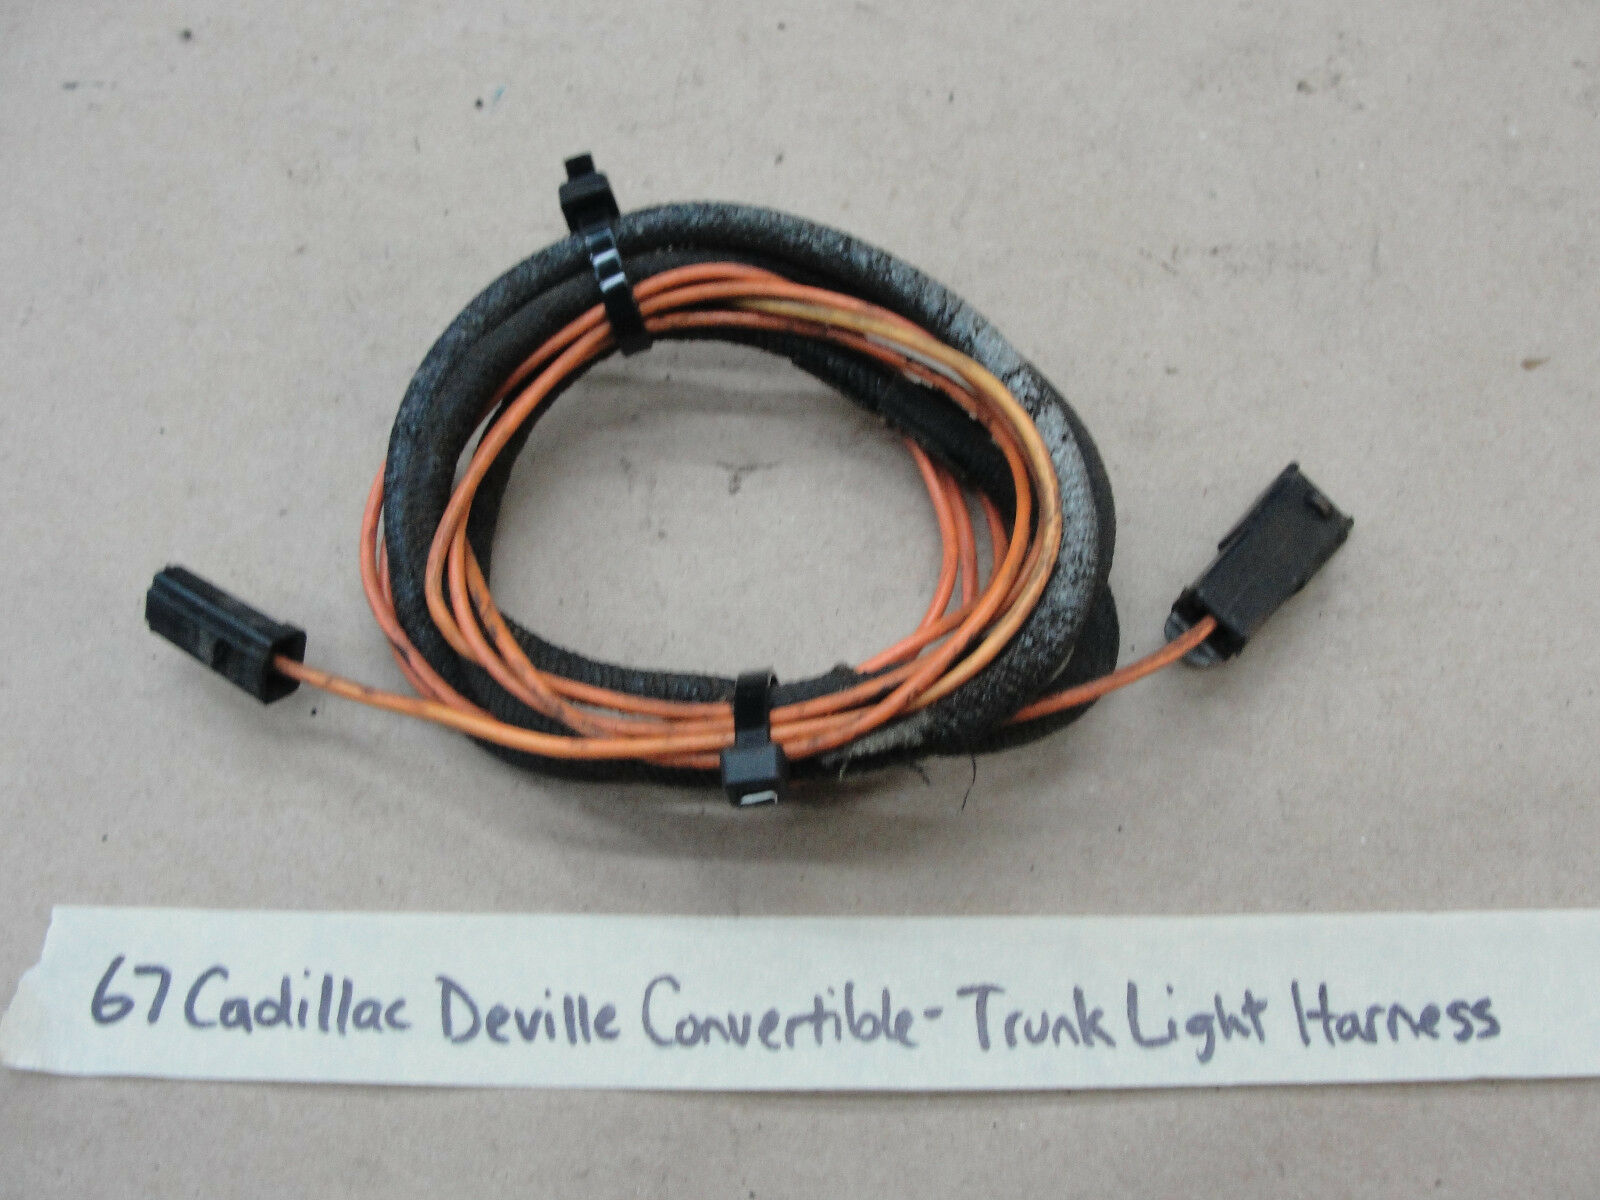 OEM 67 Cadillac Deville CONVERTIBLE TRUNK LIGHT WIRE HARNESS PIGTAIL GM 1967 - $39.59